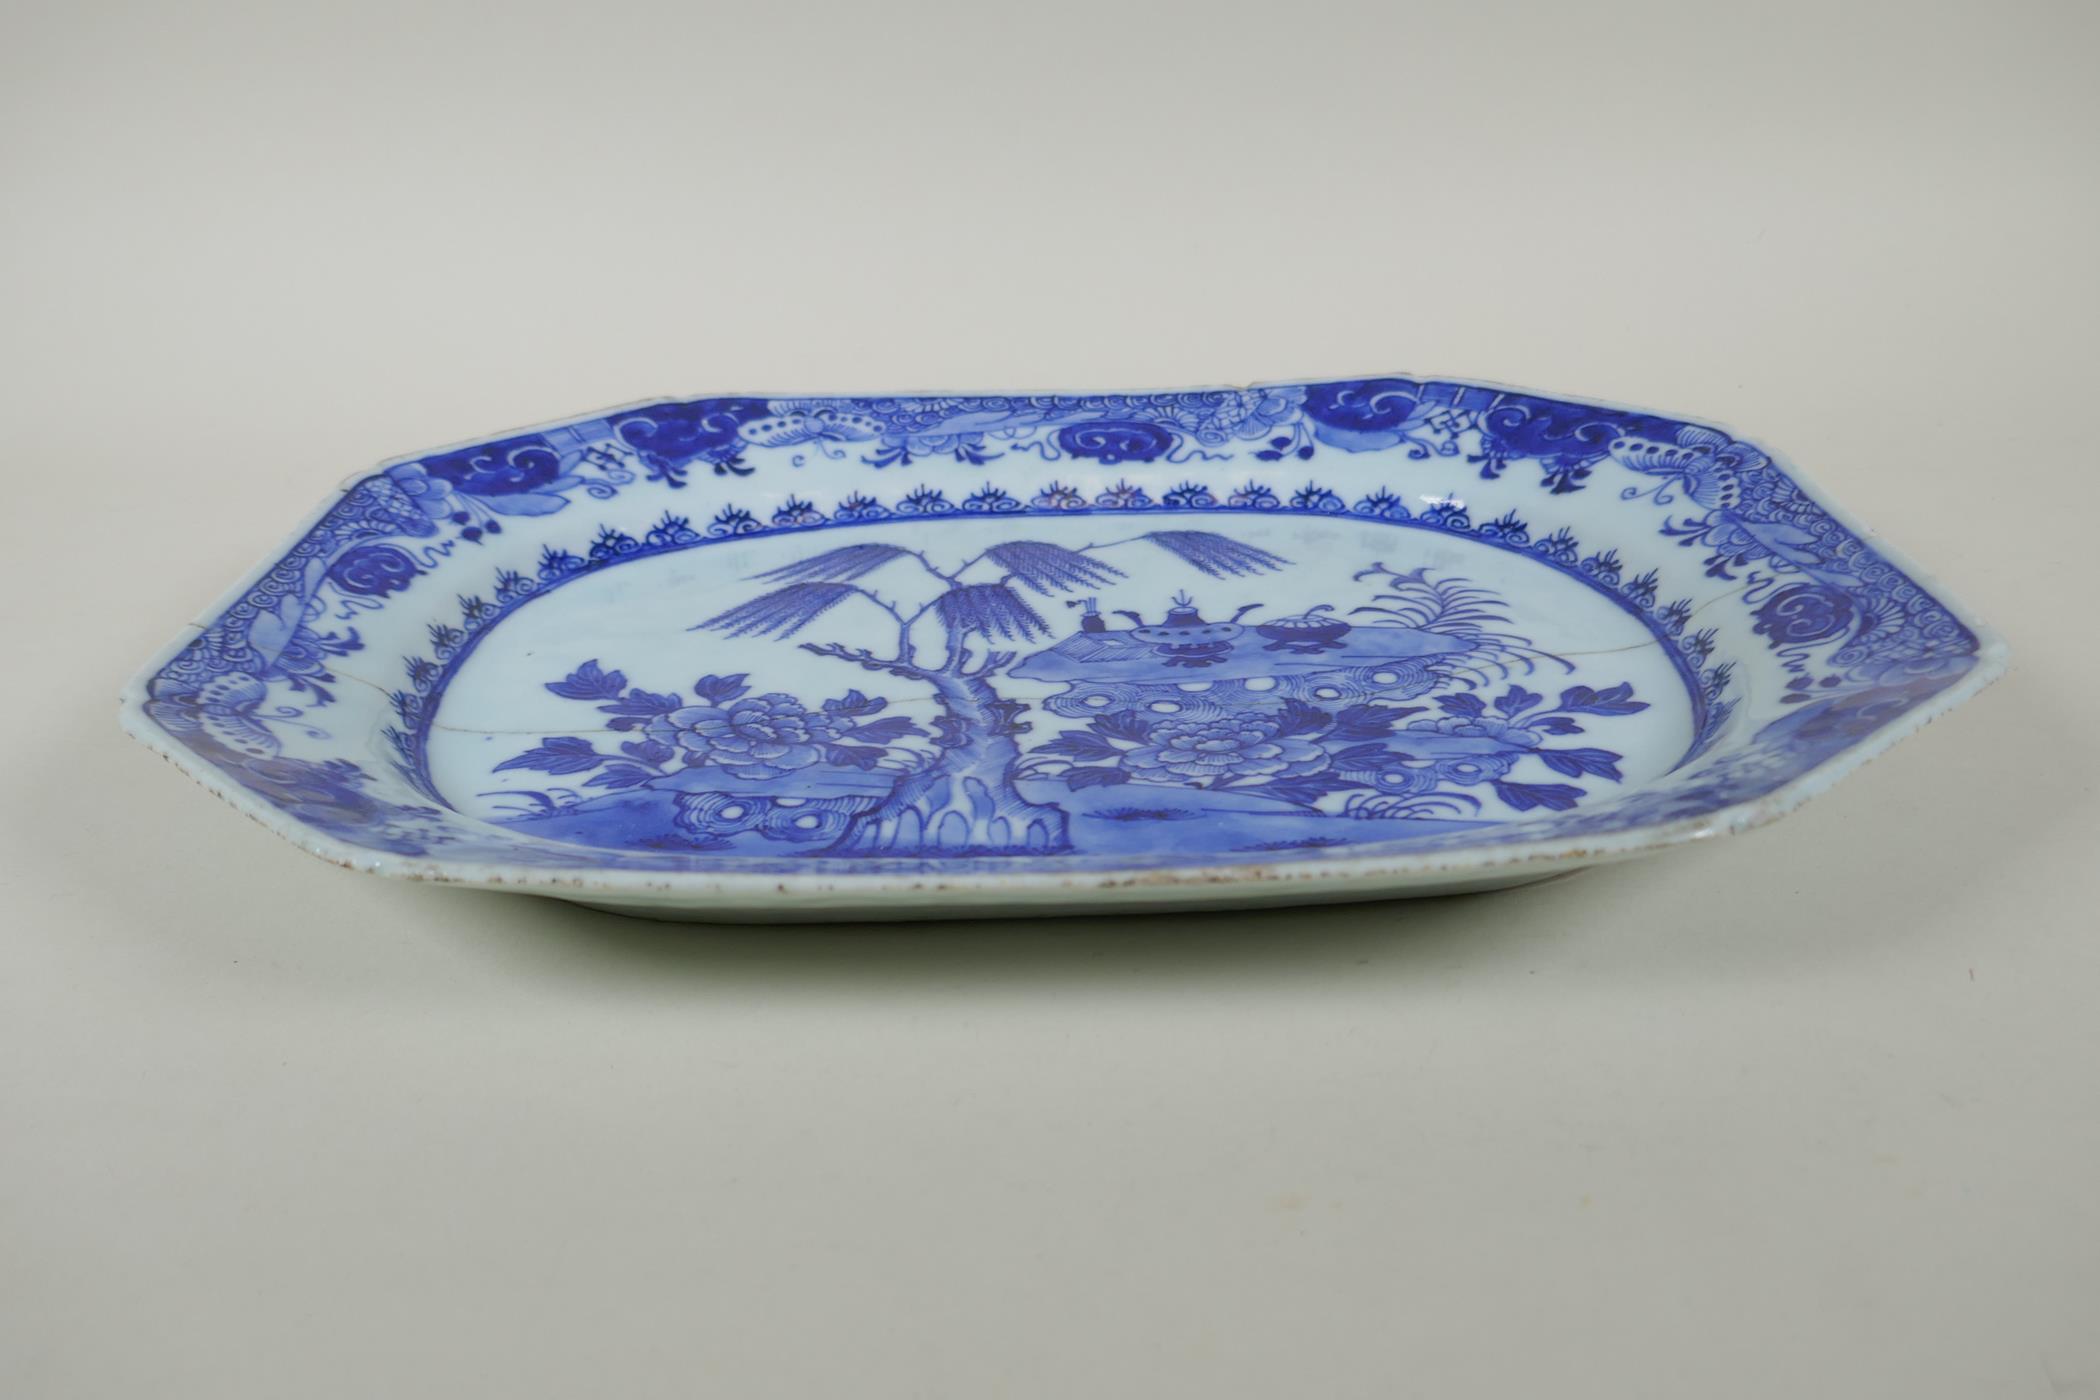 A C19th Chinese blue and white porcelain export ware dish, with historic pinned repairs, 36 x 27cm - Image 2 of 3